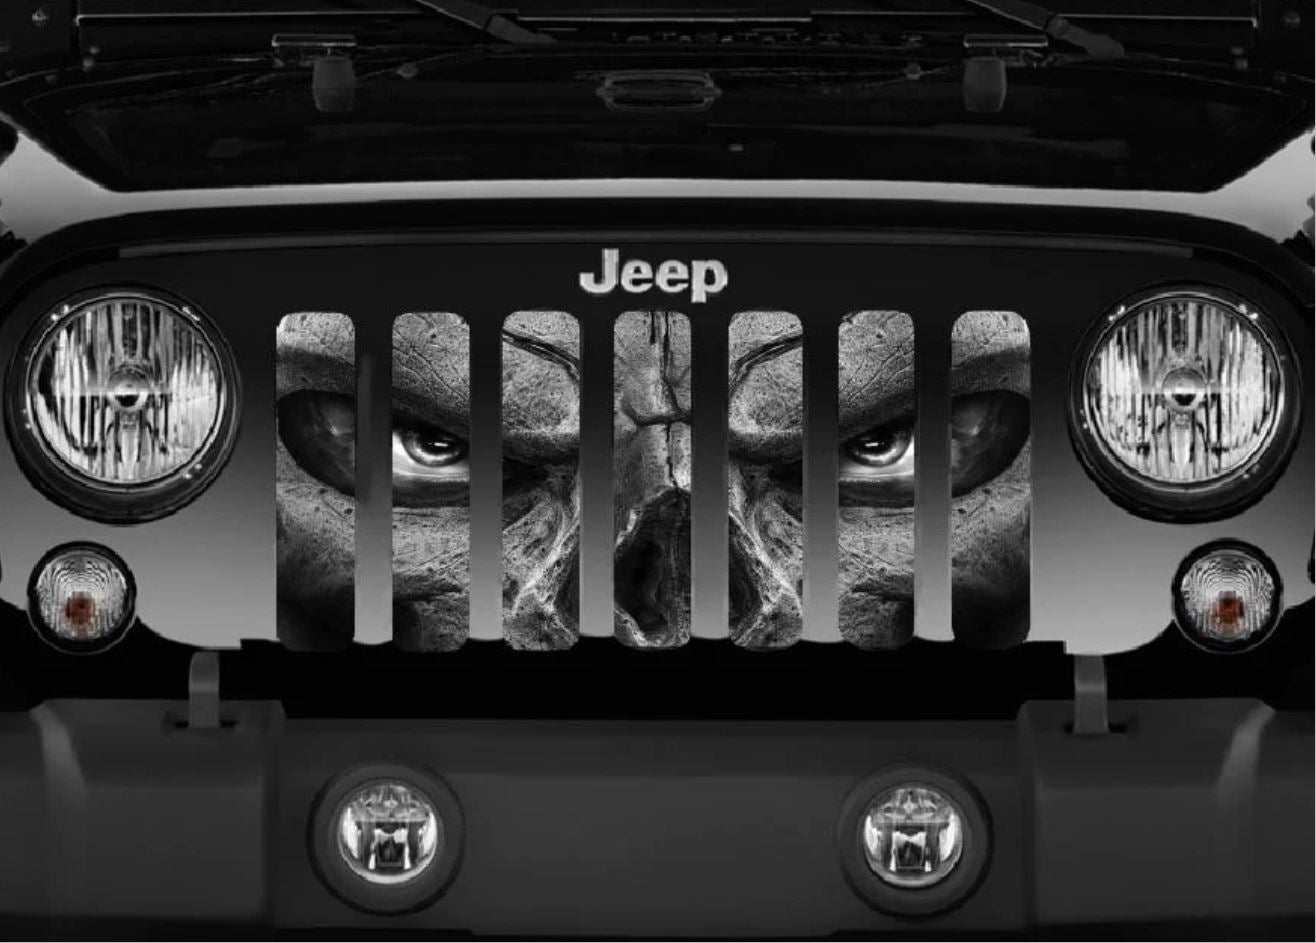 Close up view of a Jeep grille insert design of a skeleton in grayscale with gray eyes fiercely watching you. 